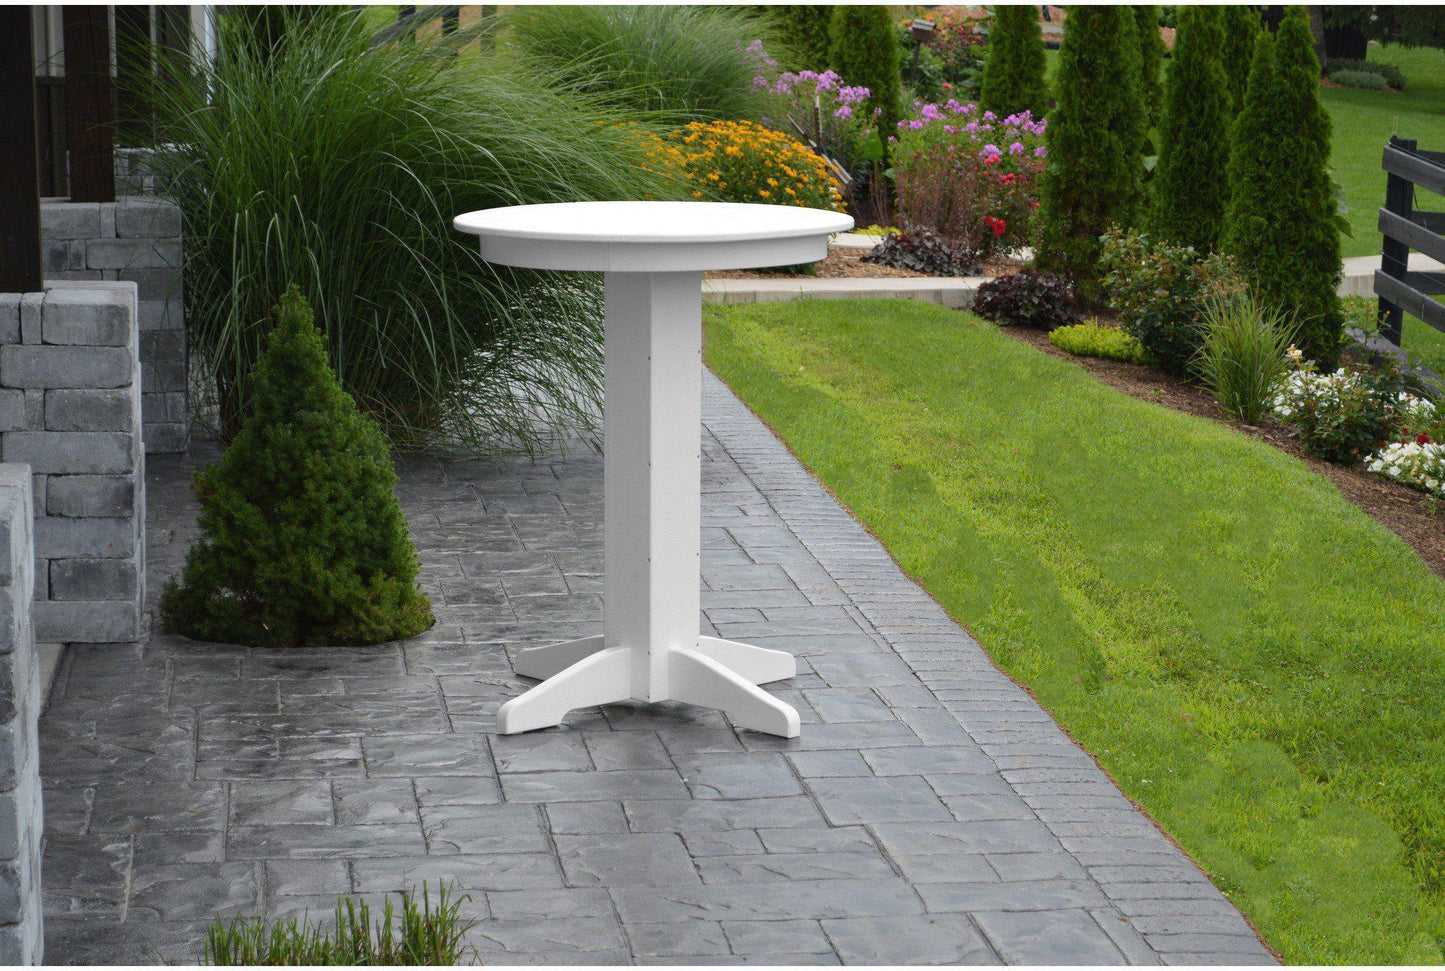 A&L Furniture Recycled Plastic 33" Round Bar Table - White